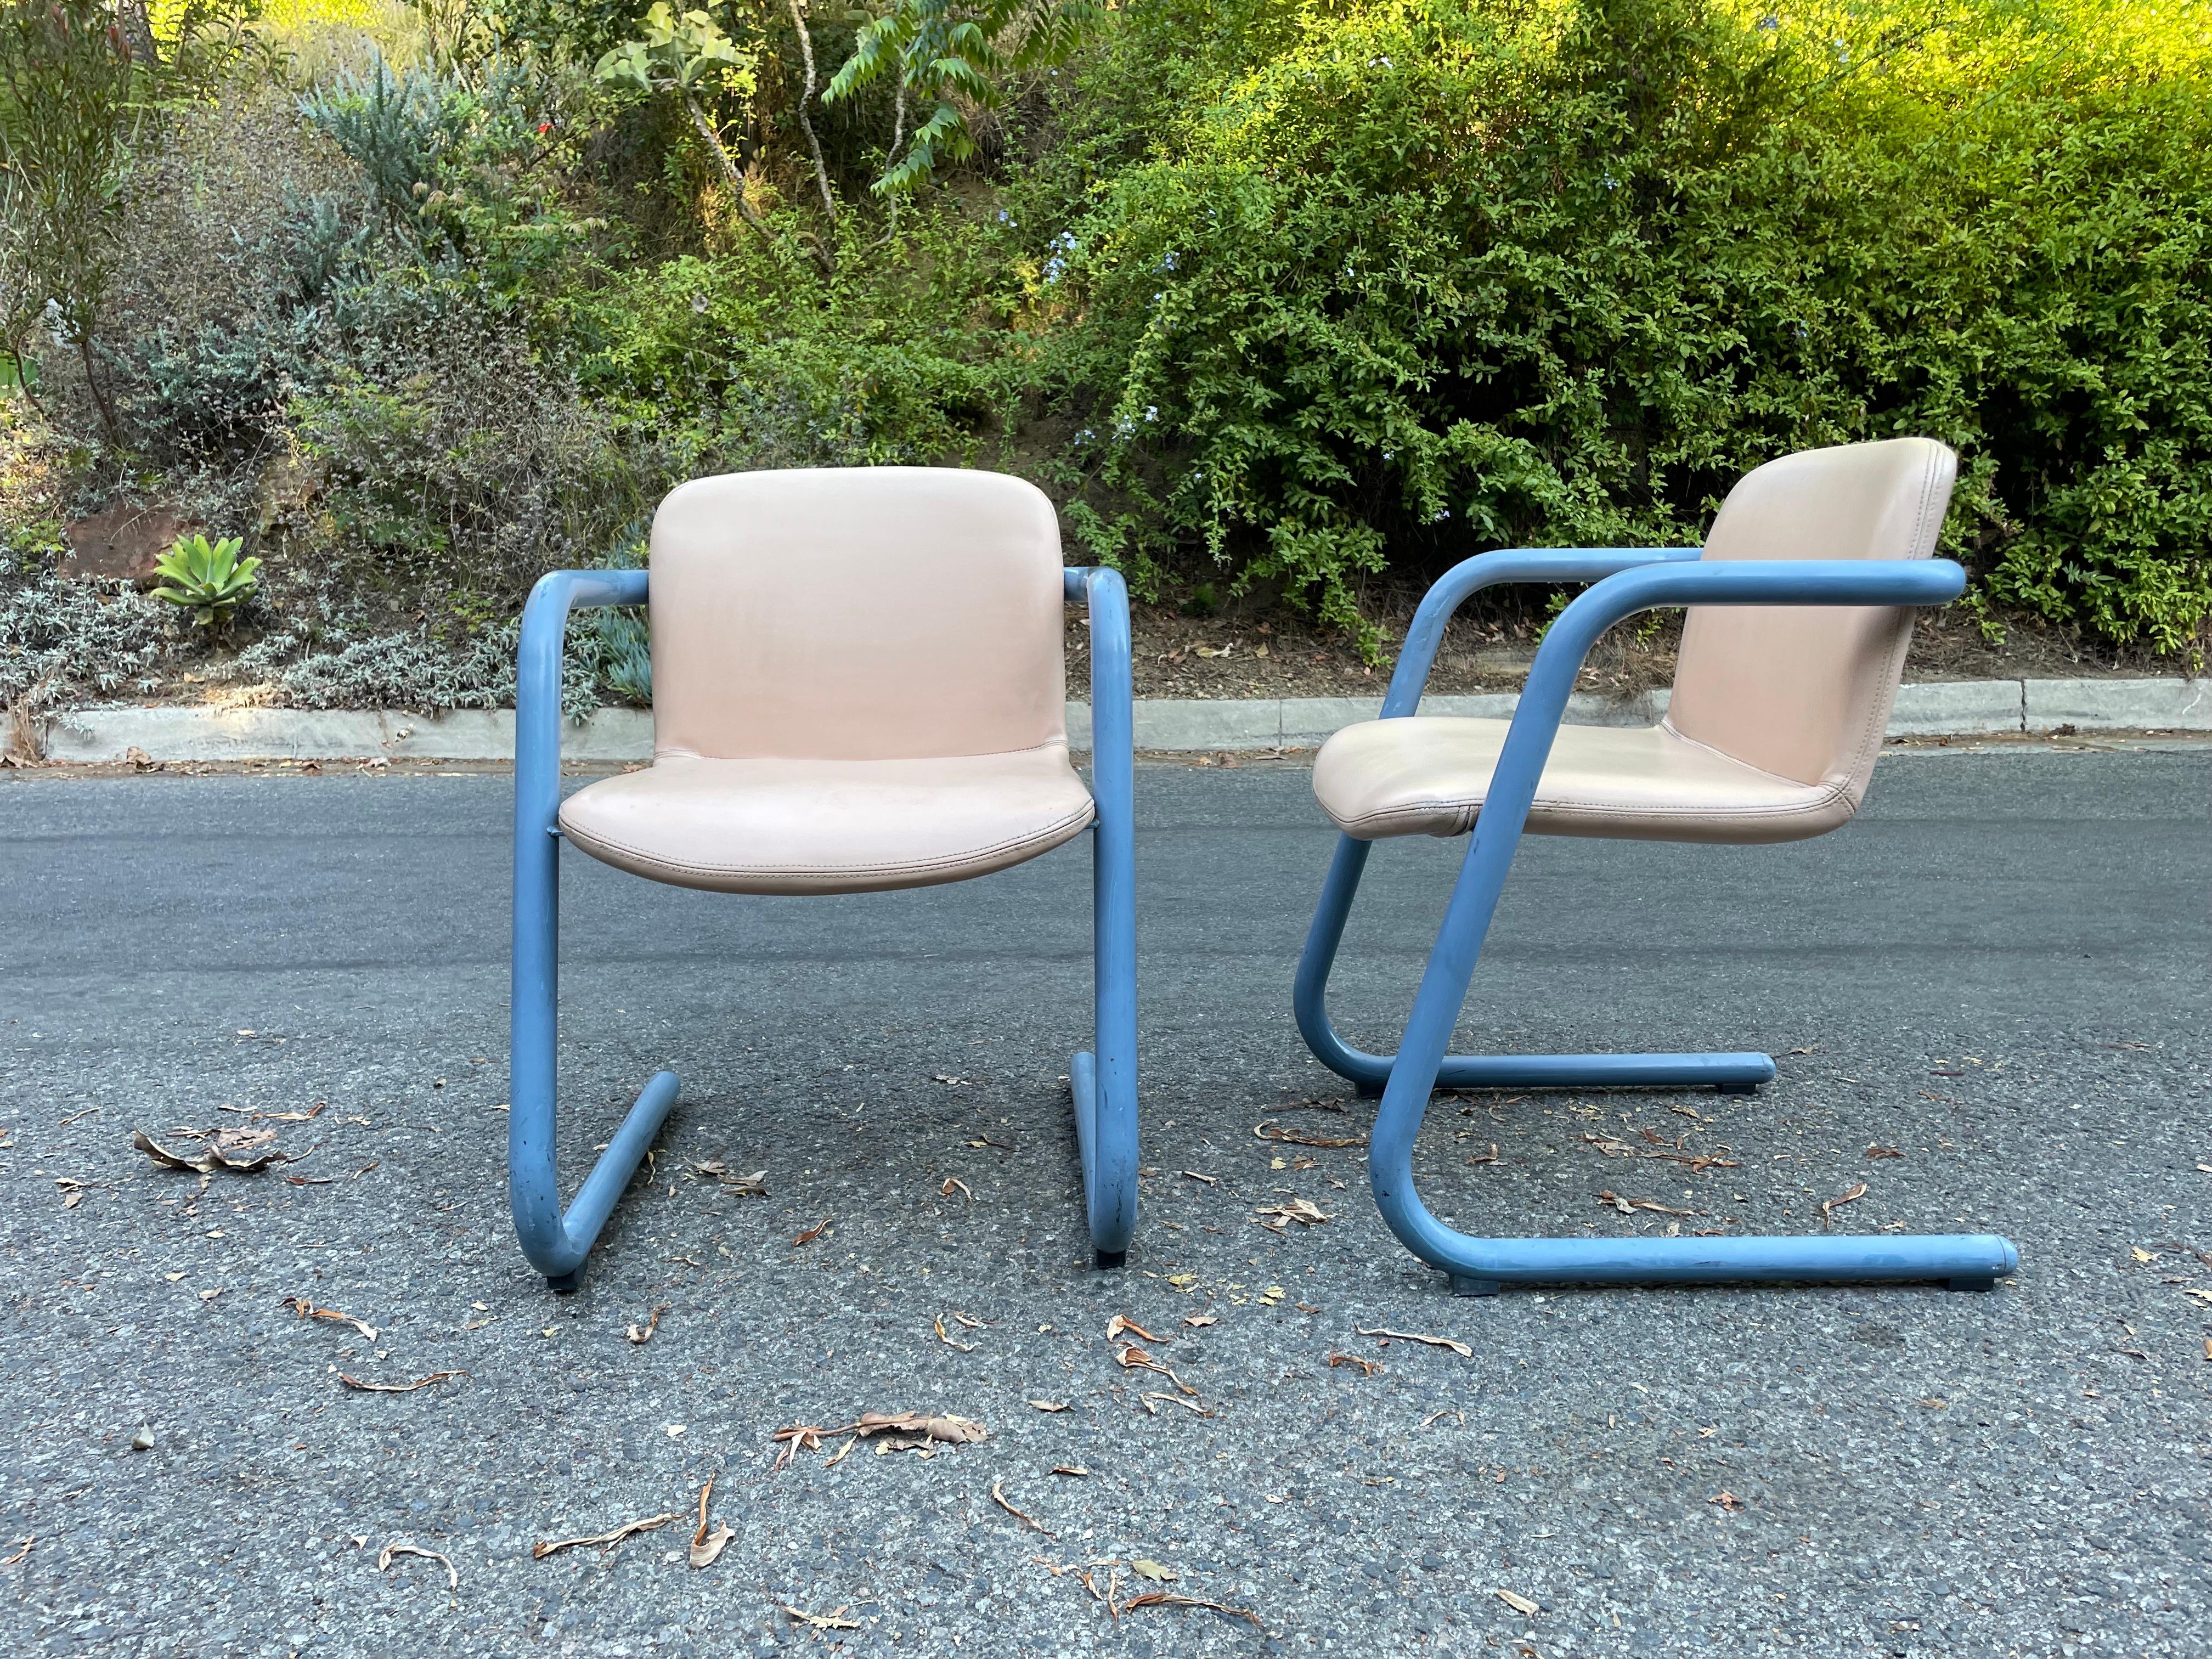 Set of 2 Vintage Kinetics Blue & Tan 100/300 Chairs, circa 1970’s in good condition. Designed by Philip Salmon and Hugh Hamilton for Kinetics.

Really cool. Price is for the pair.

Very good vintage condition with minor flaws as expected with age.